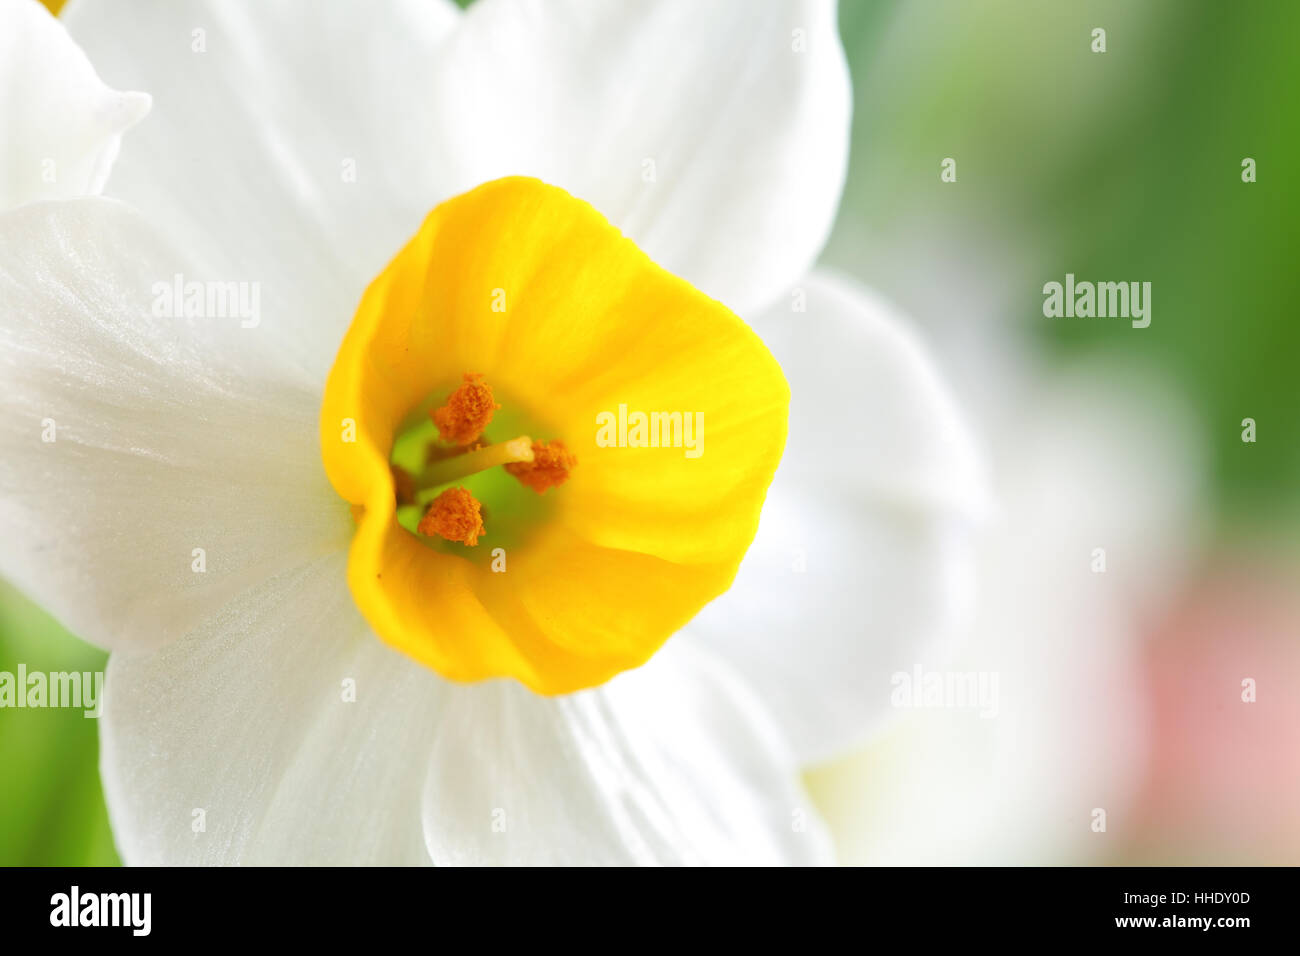 leaf, garden, space, flower, plant, wild, new, lily, easter, spring, china, Stock Photo